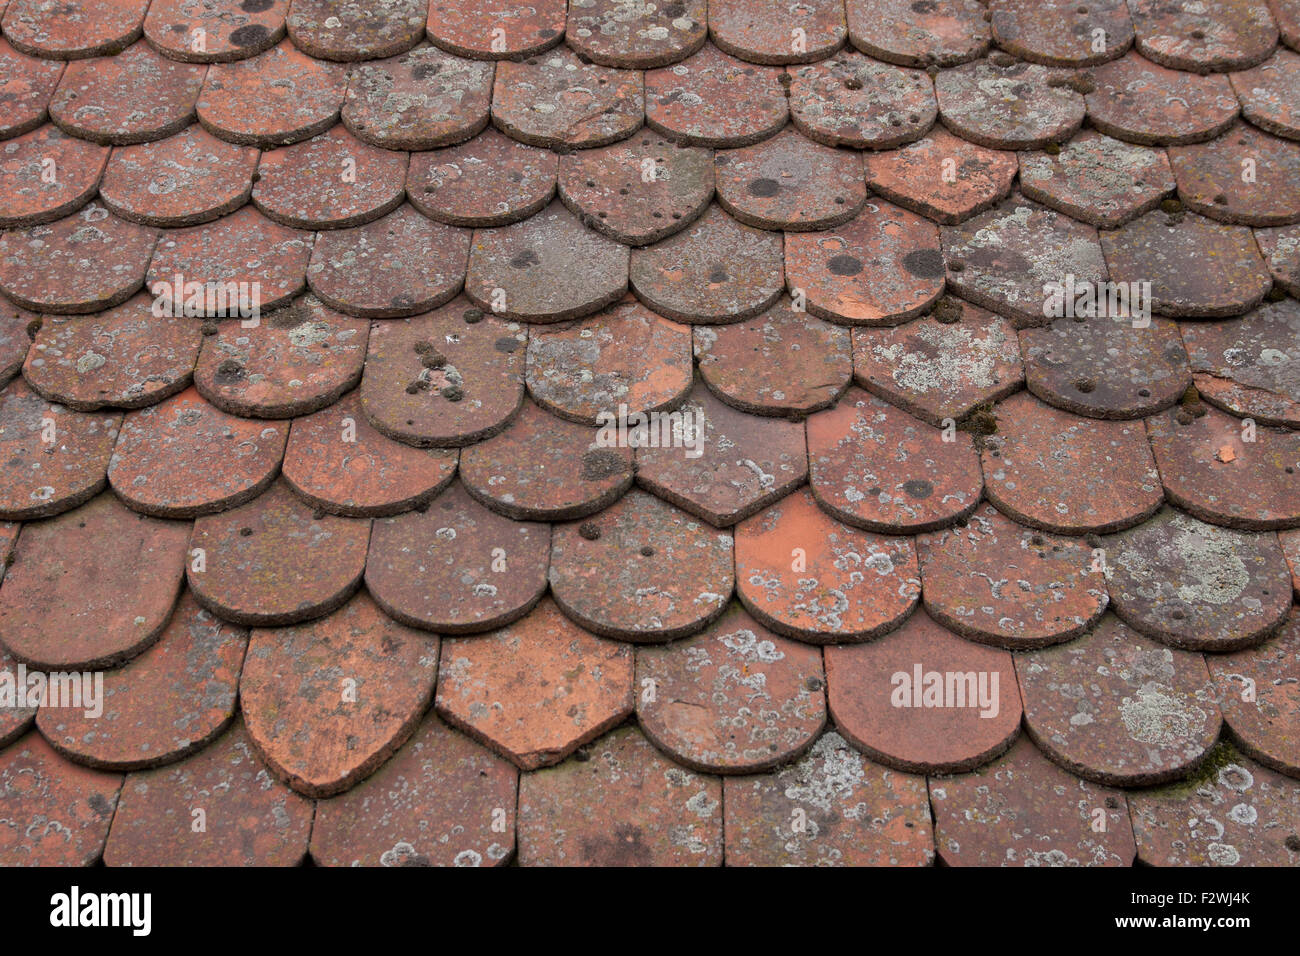 Old Roof Tiles Germany Stock Photo